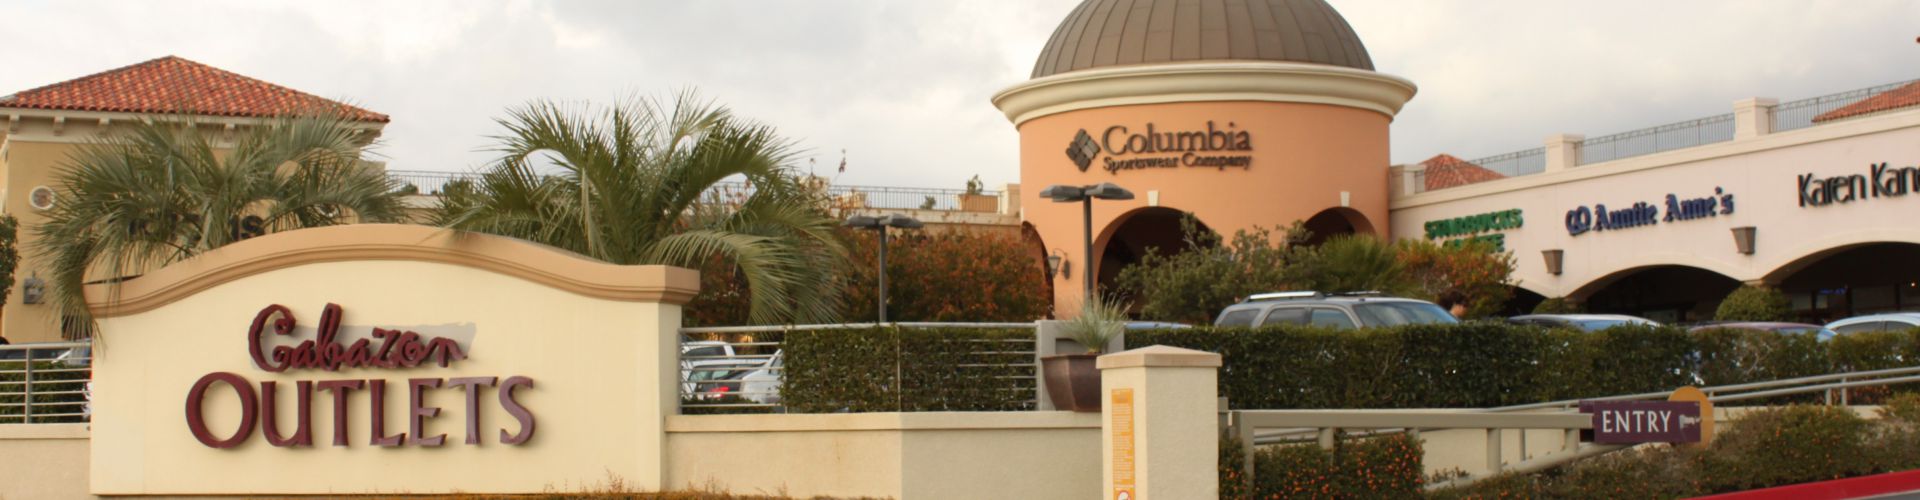 Cabazon Outlets - Commercial Center - Palm Springs - Reviews - ellgeeBE